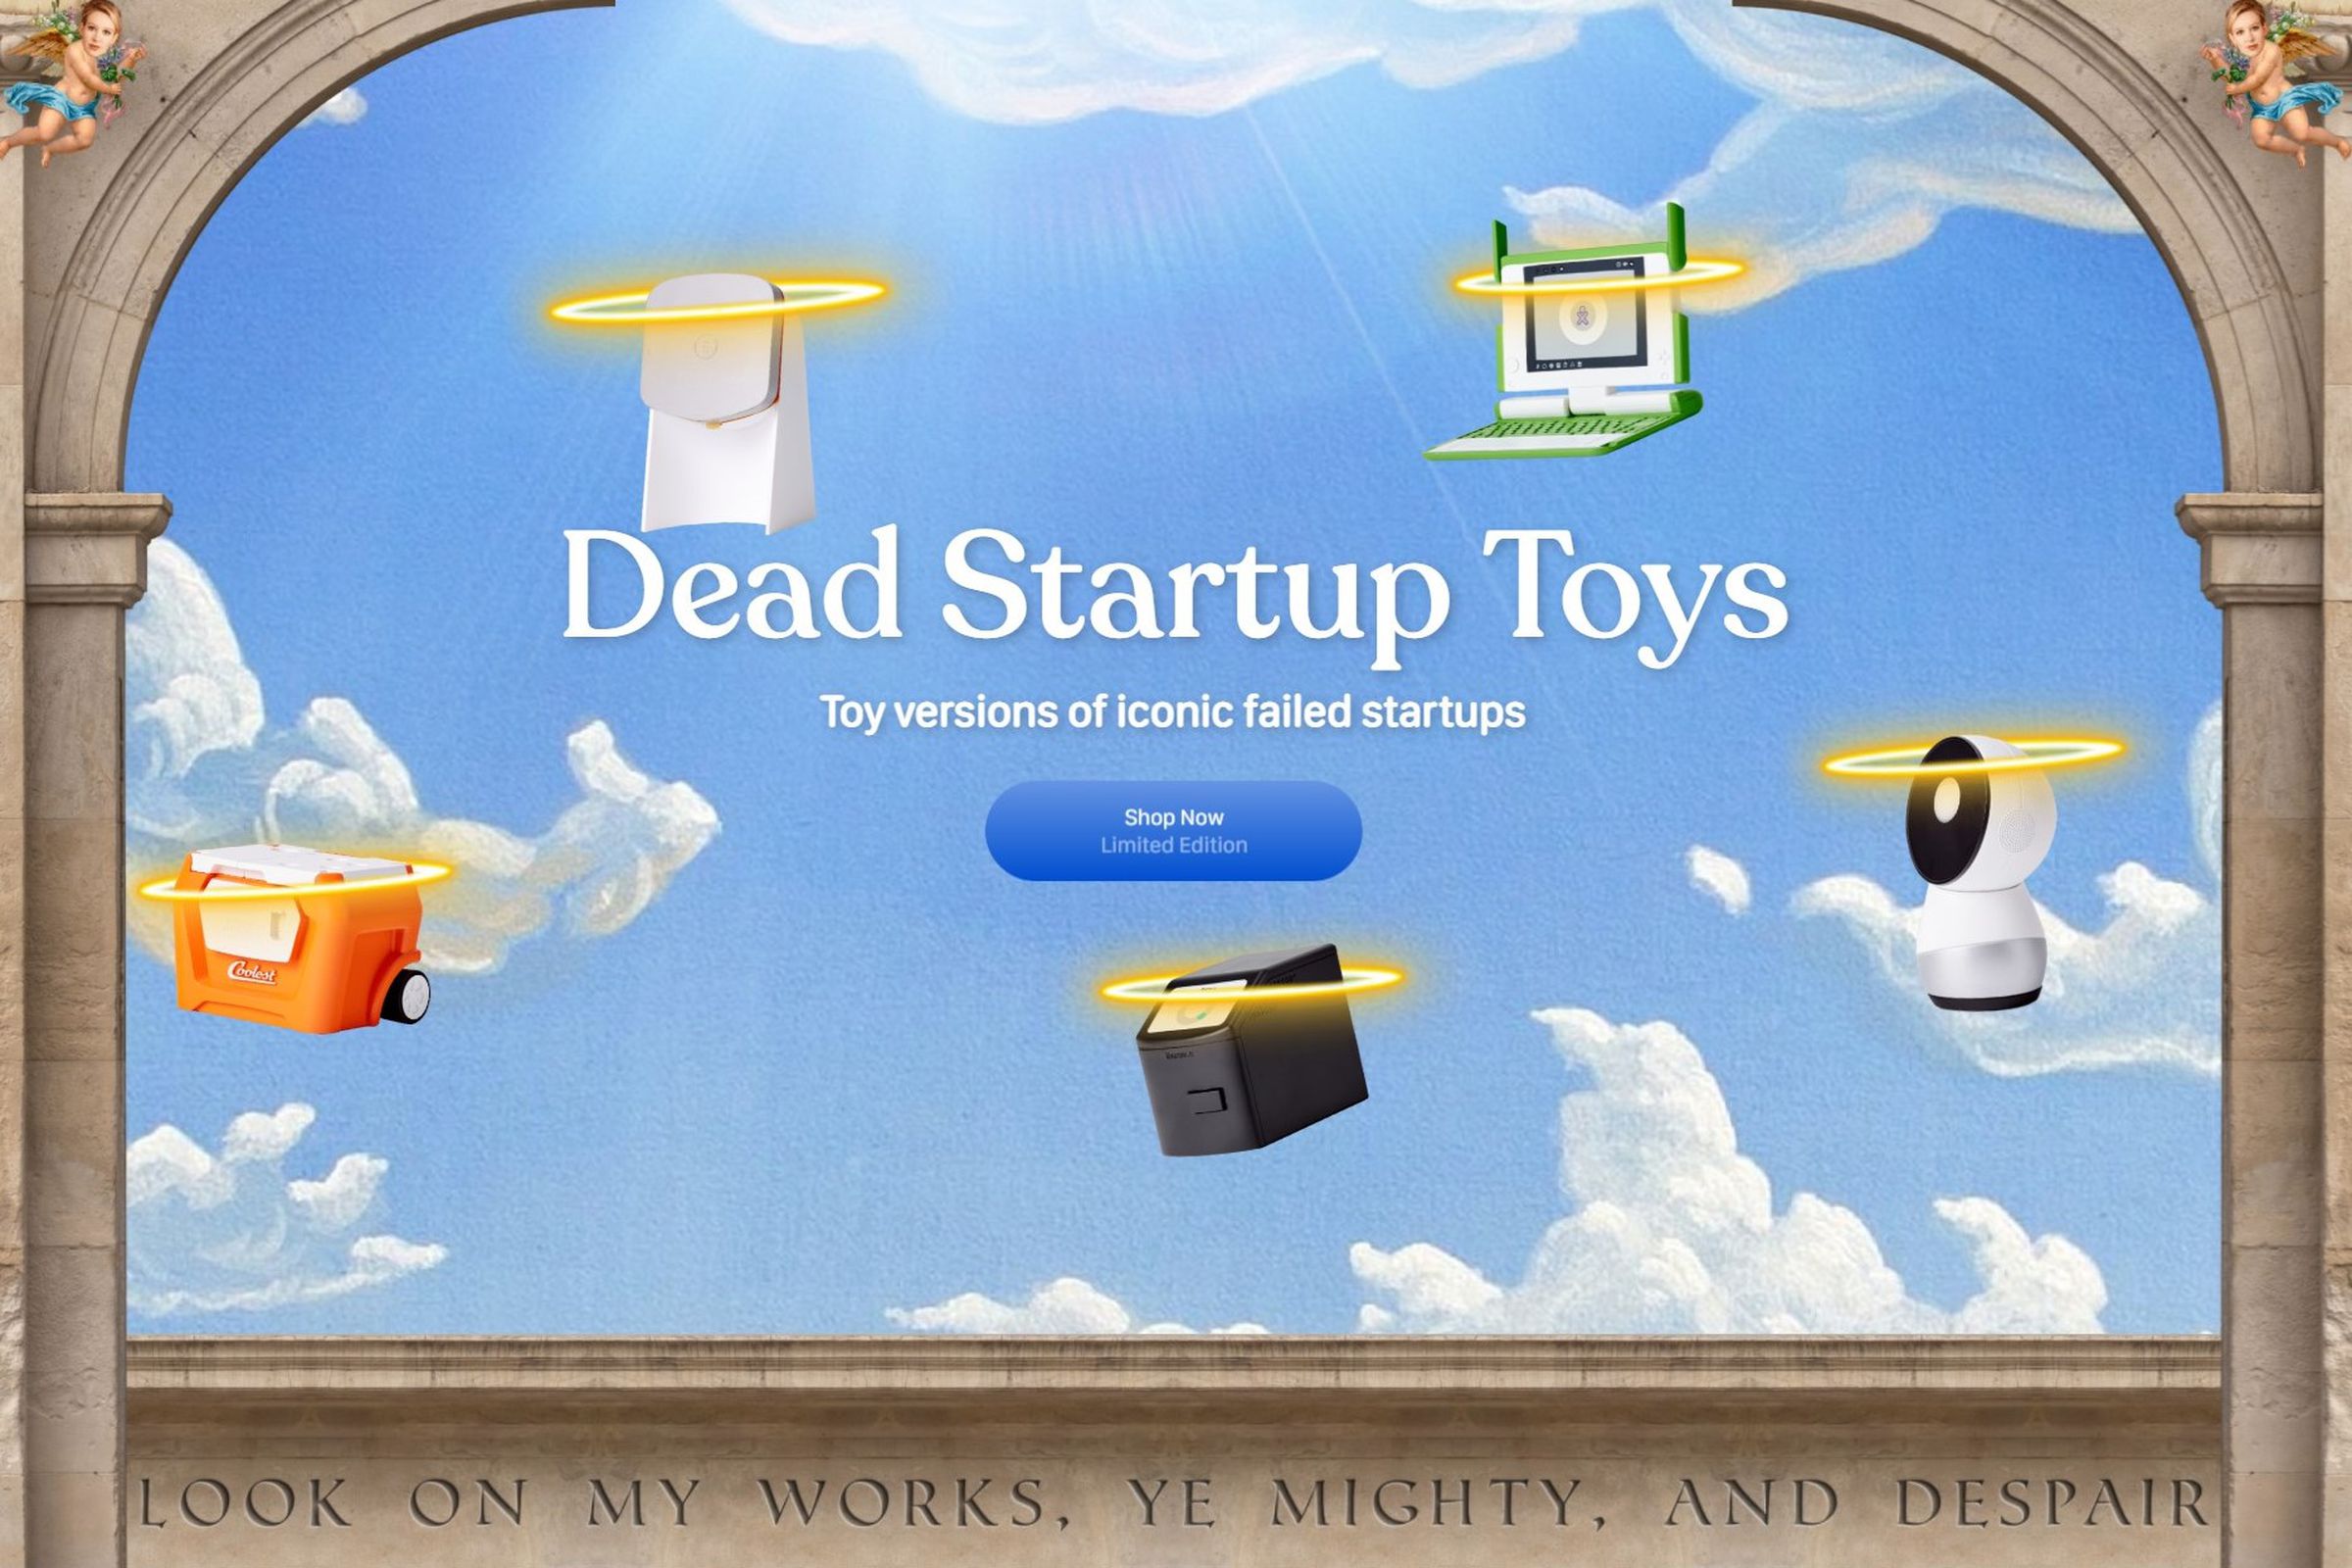 Five toys based on iconic startup failures.